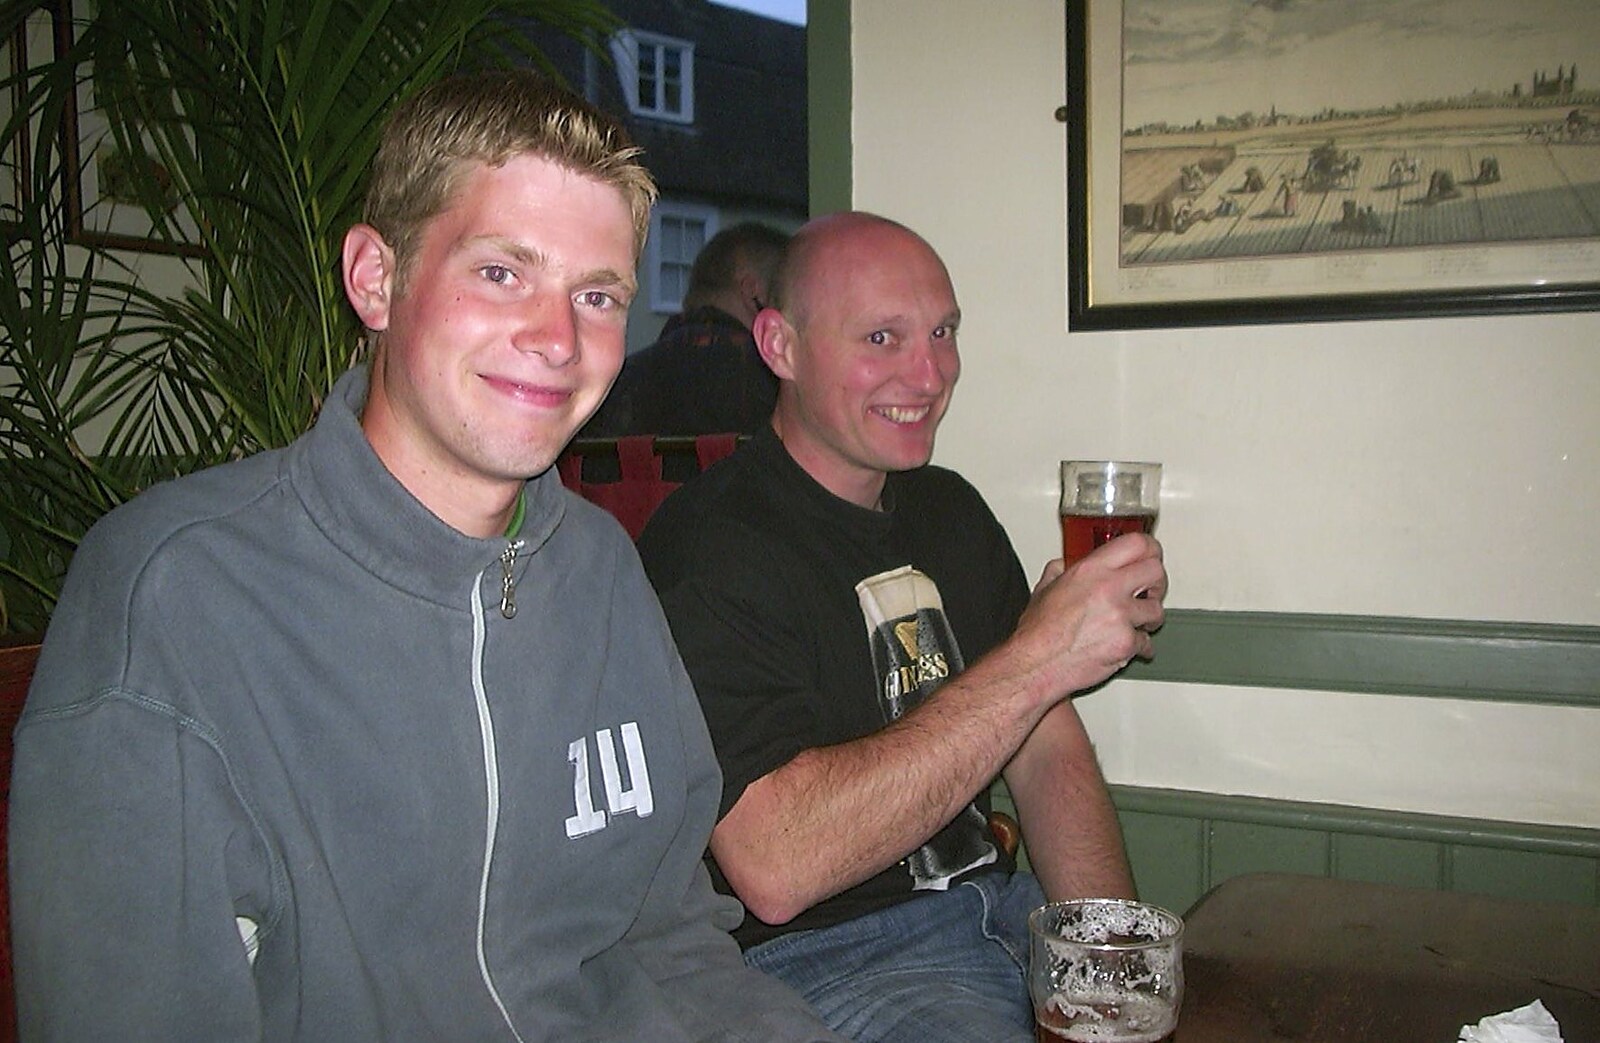 A Trip to Alton Towers, Staffordshire - 19th June 2004: The Boy Phil and Gov in the Castle Inn, Cambridge